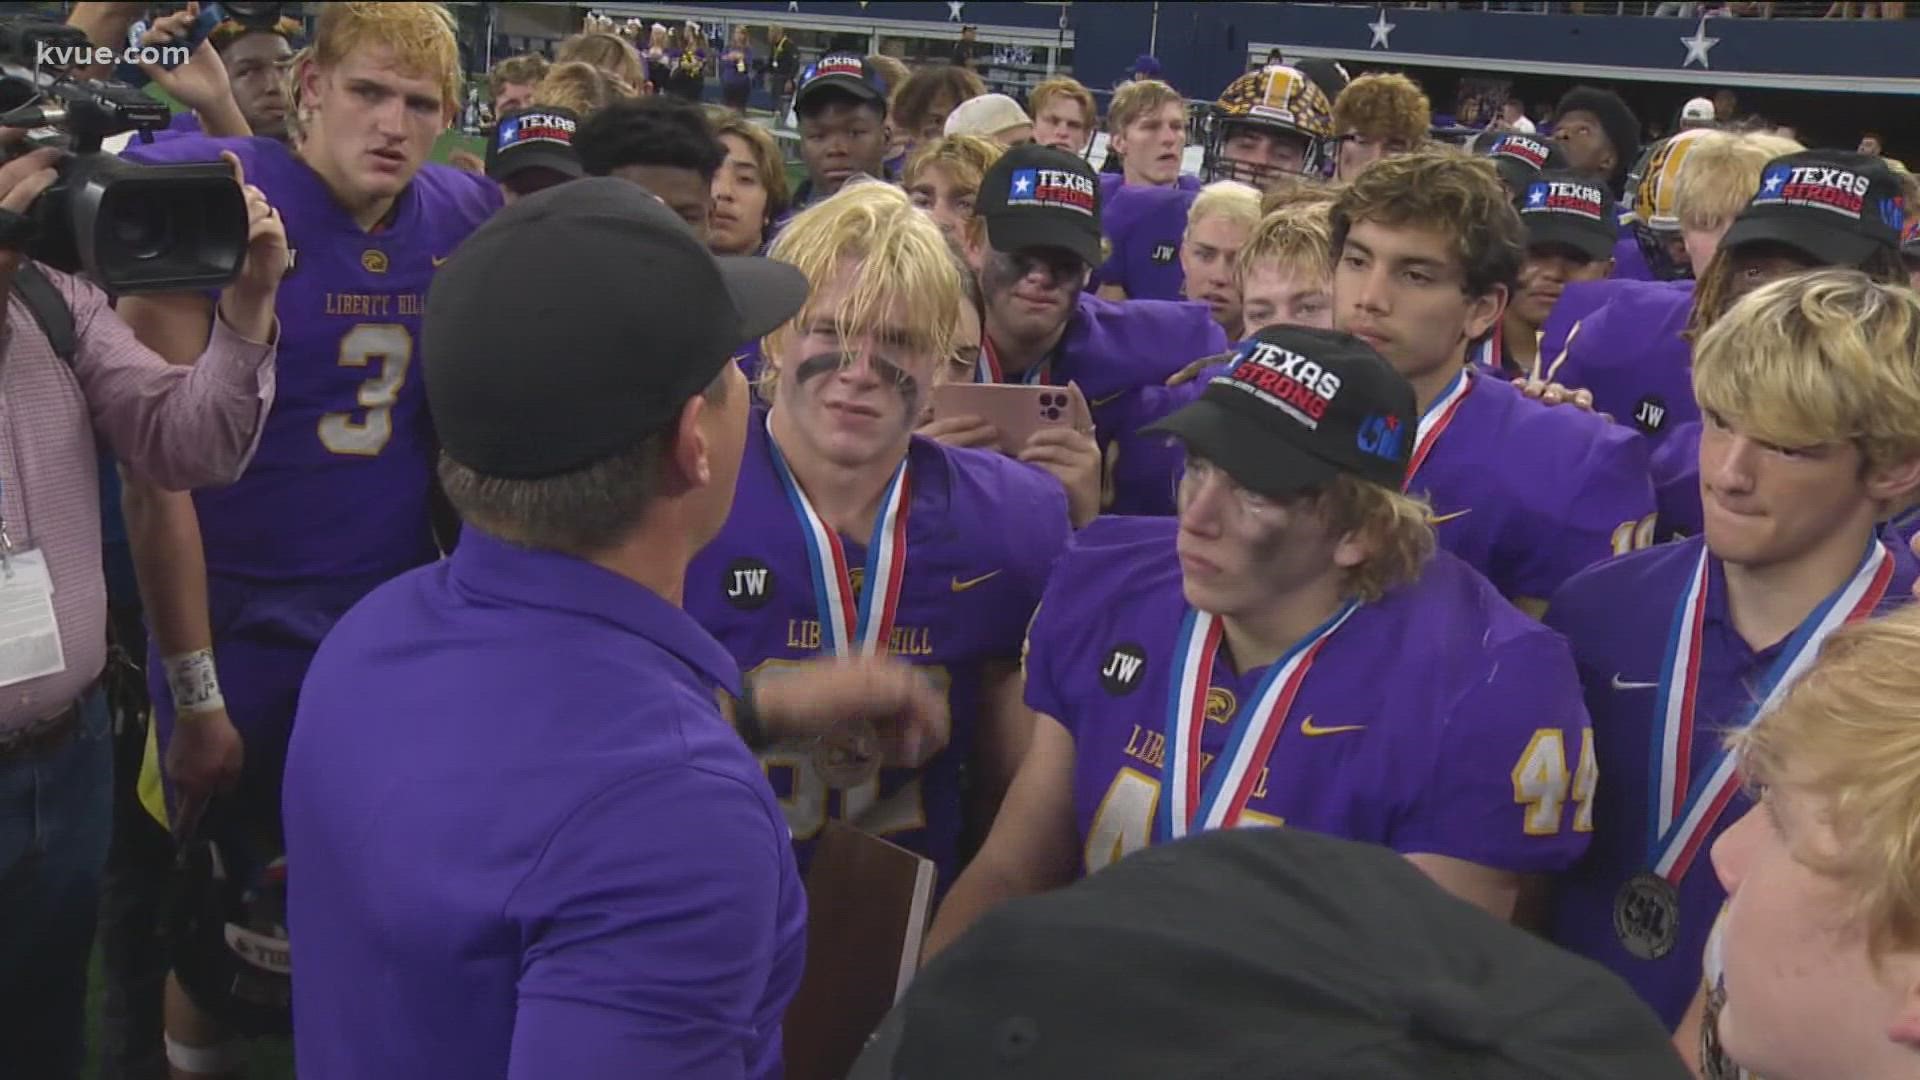 The Panthers finished the season 13-3, and just one win shy of their third state title in school history.